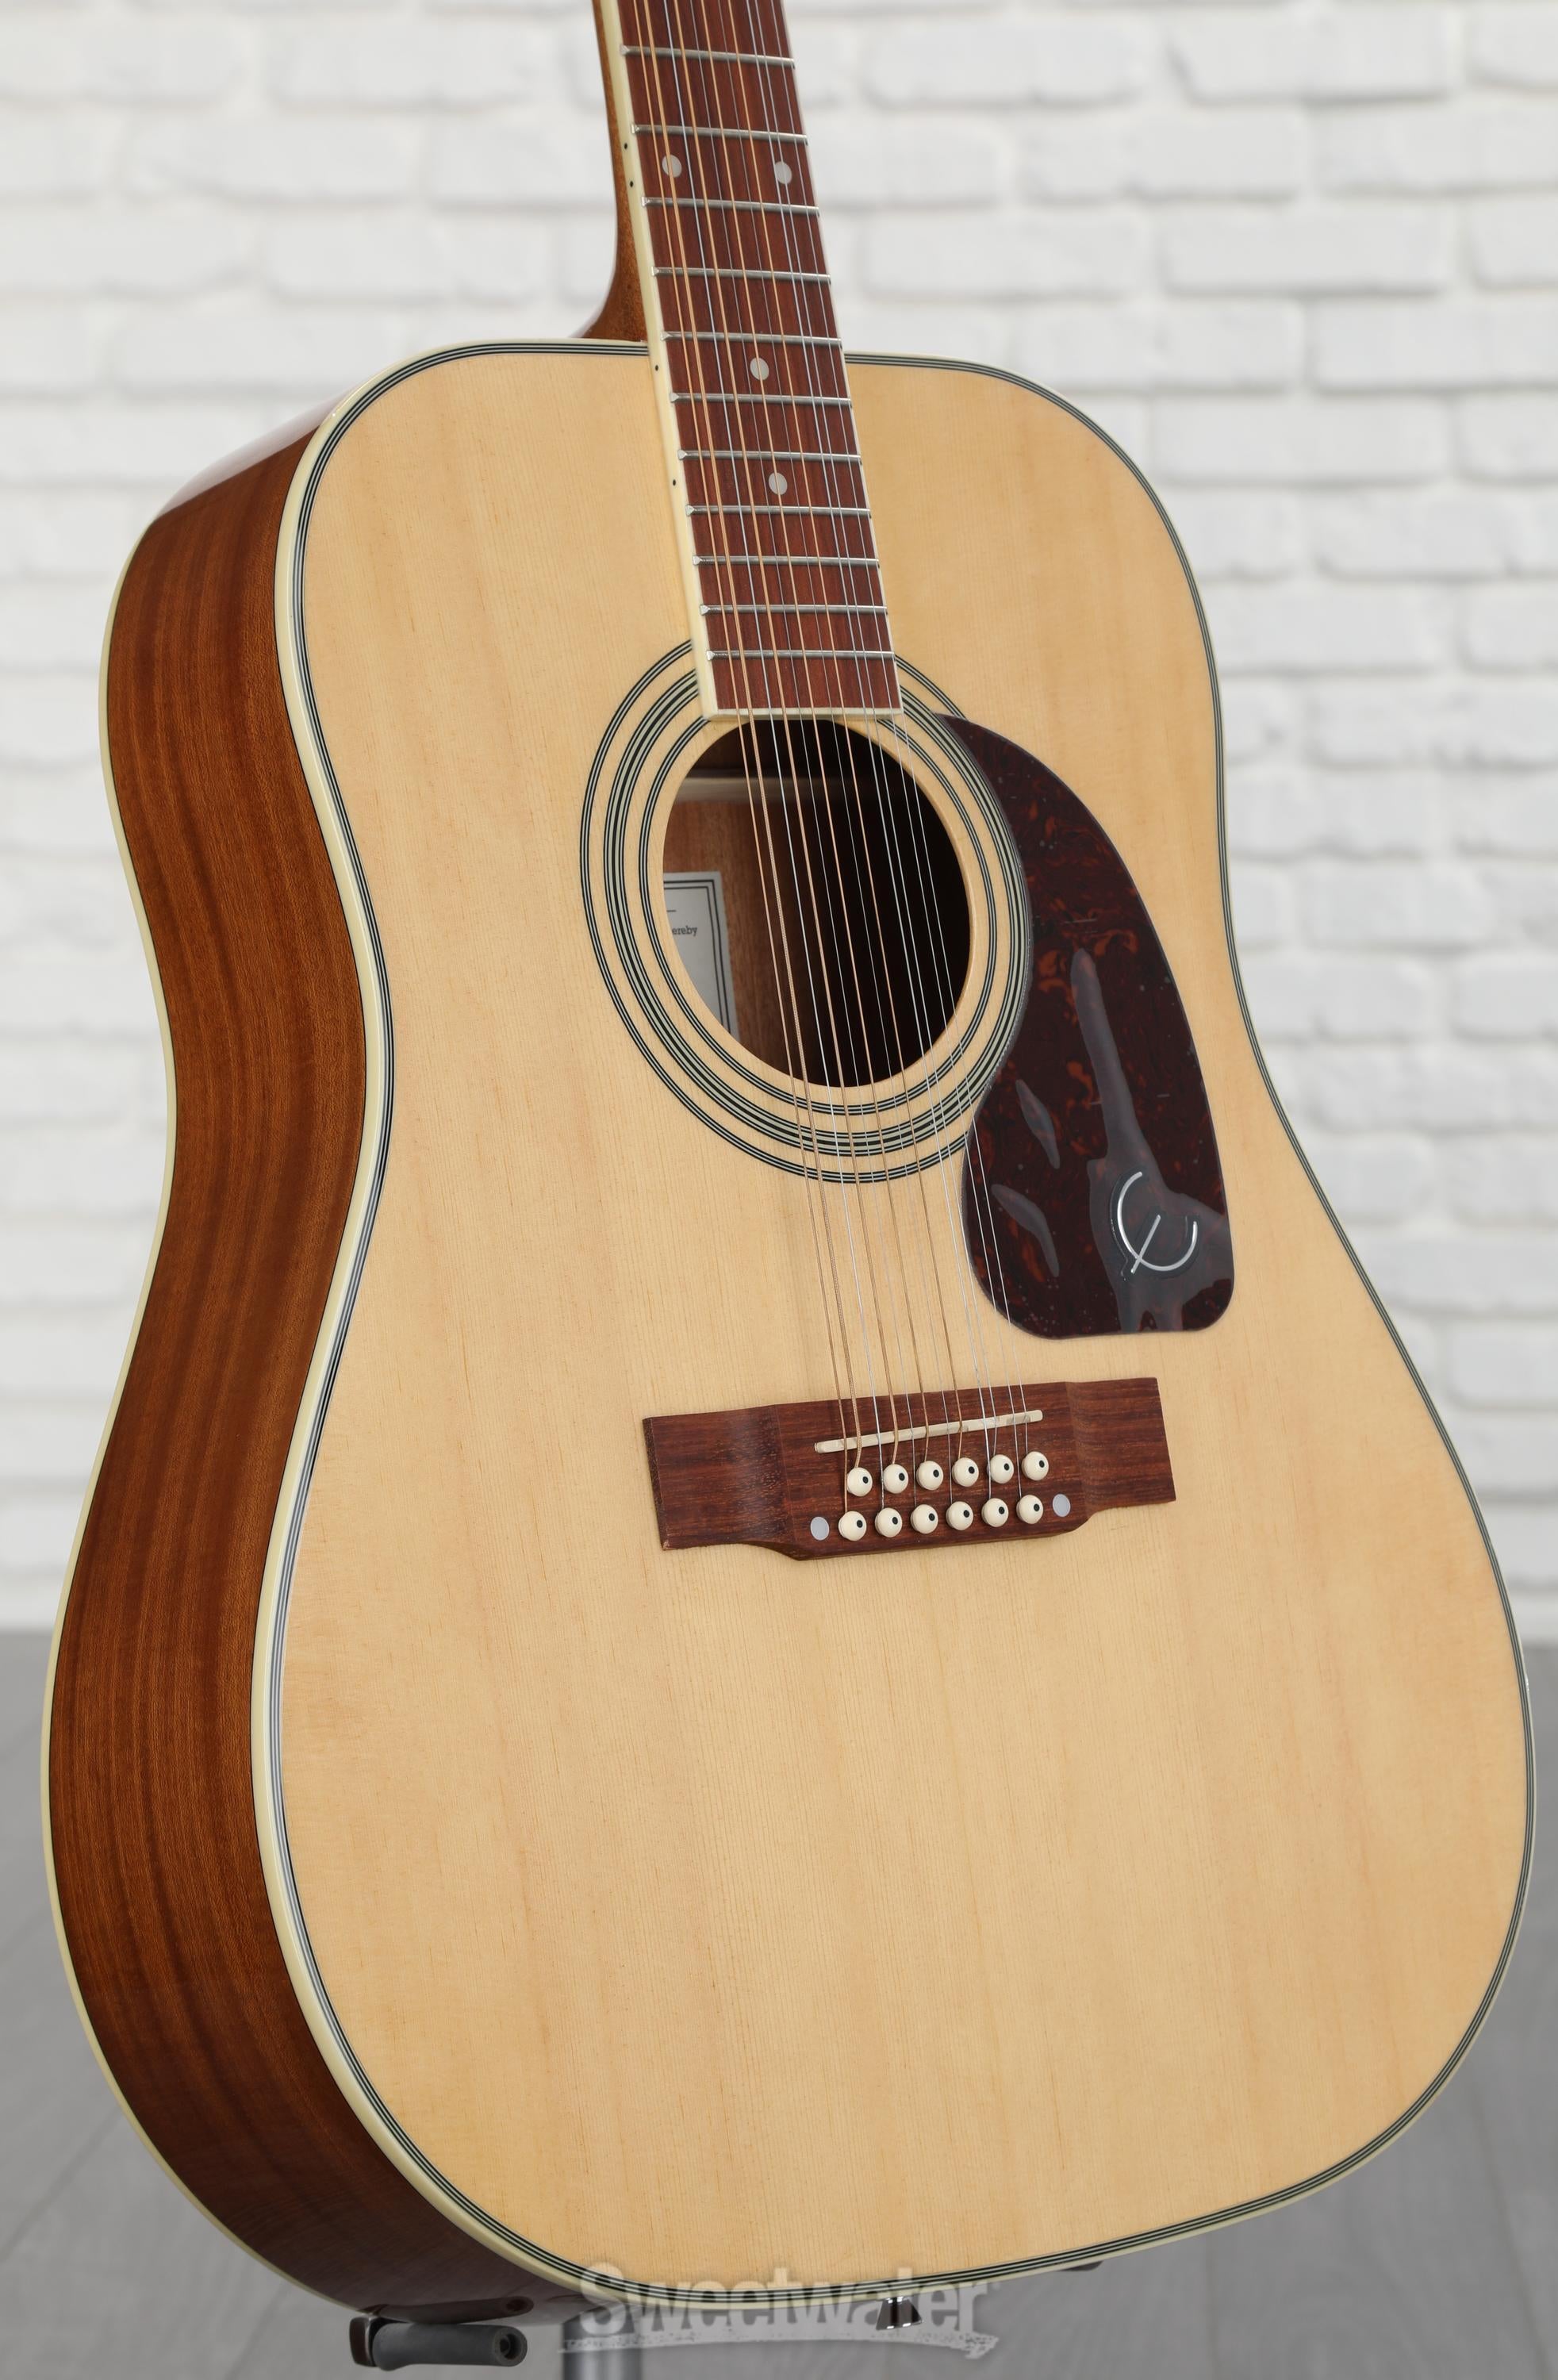 Epiphone Songmaker DR-212 12-string Acoustic Guitar - Natural | Sweetwater